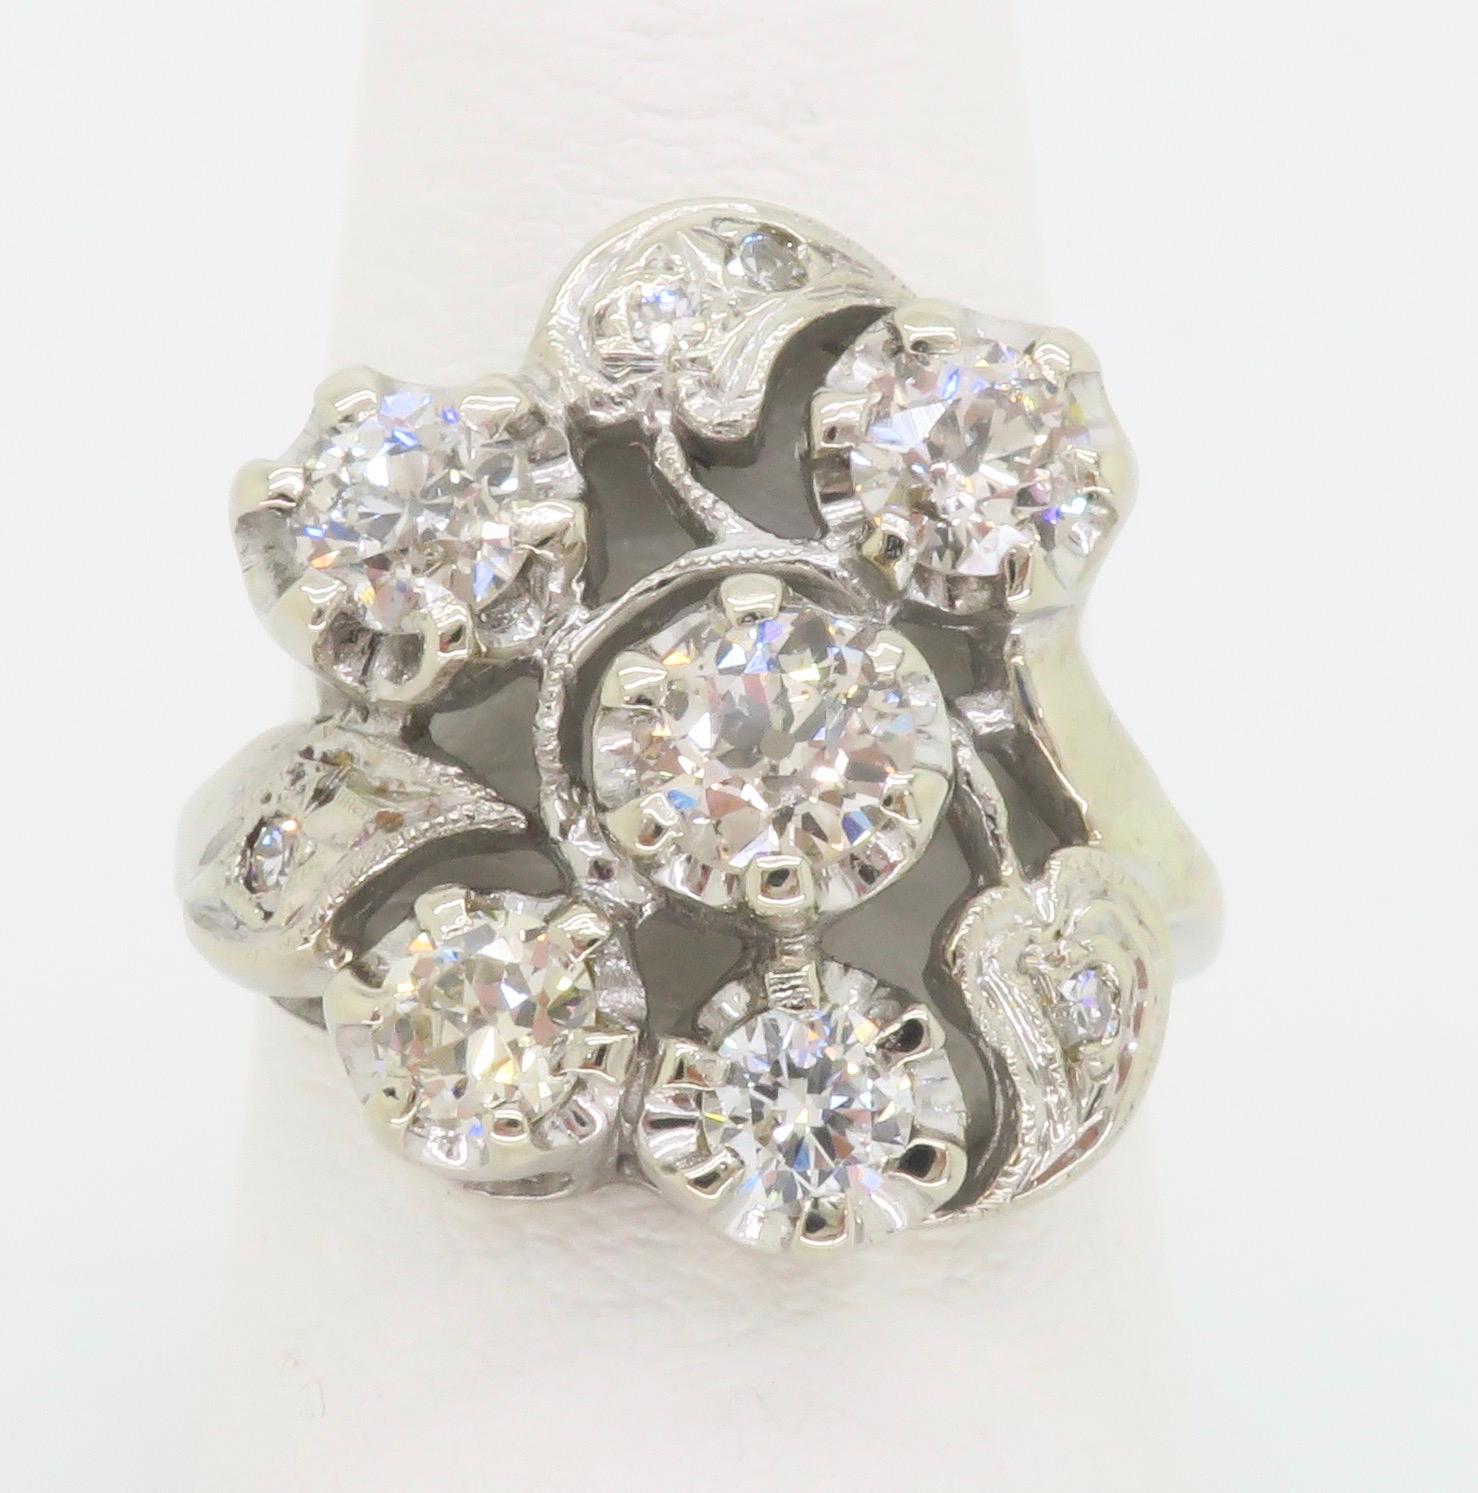 Vintage Diamond Cocktail Ring Crafted in 14k White Gold  In Excellent Condition For Sale In Webster, NY